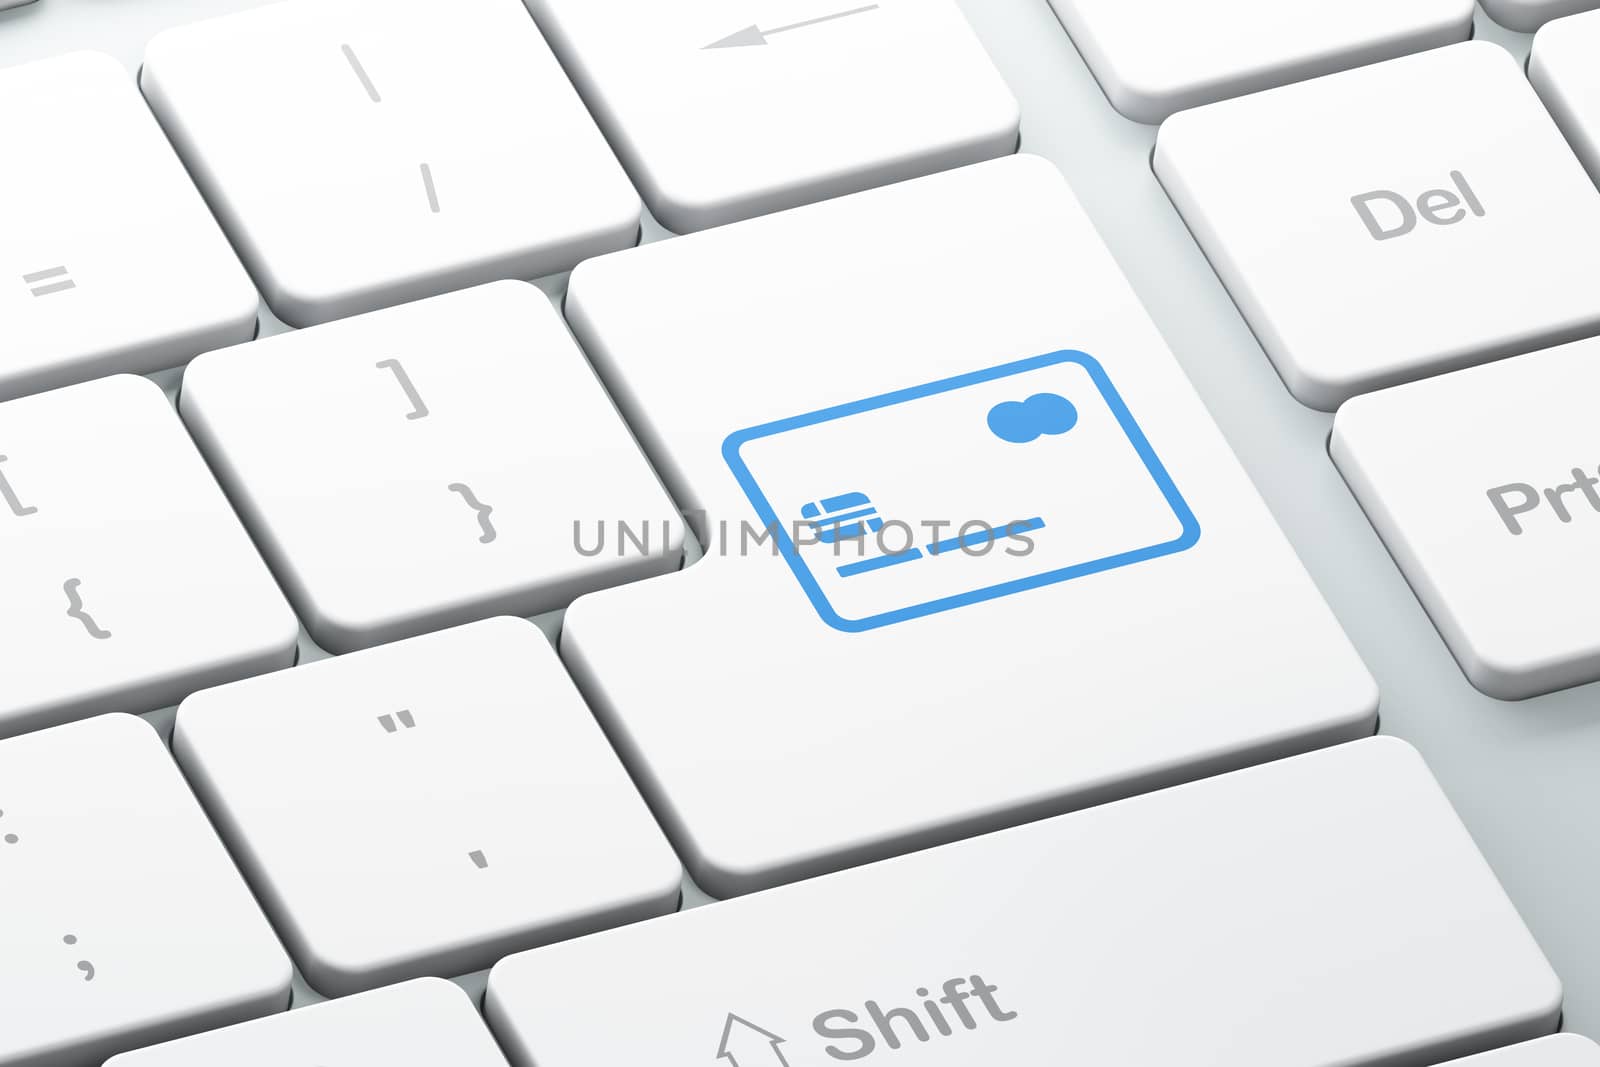 Banking concept: Enter button with Credit Card on computer keyboard background, 3d render